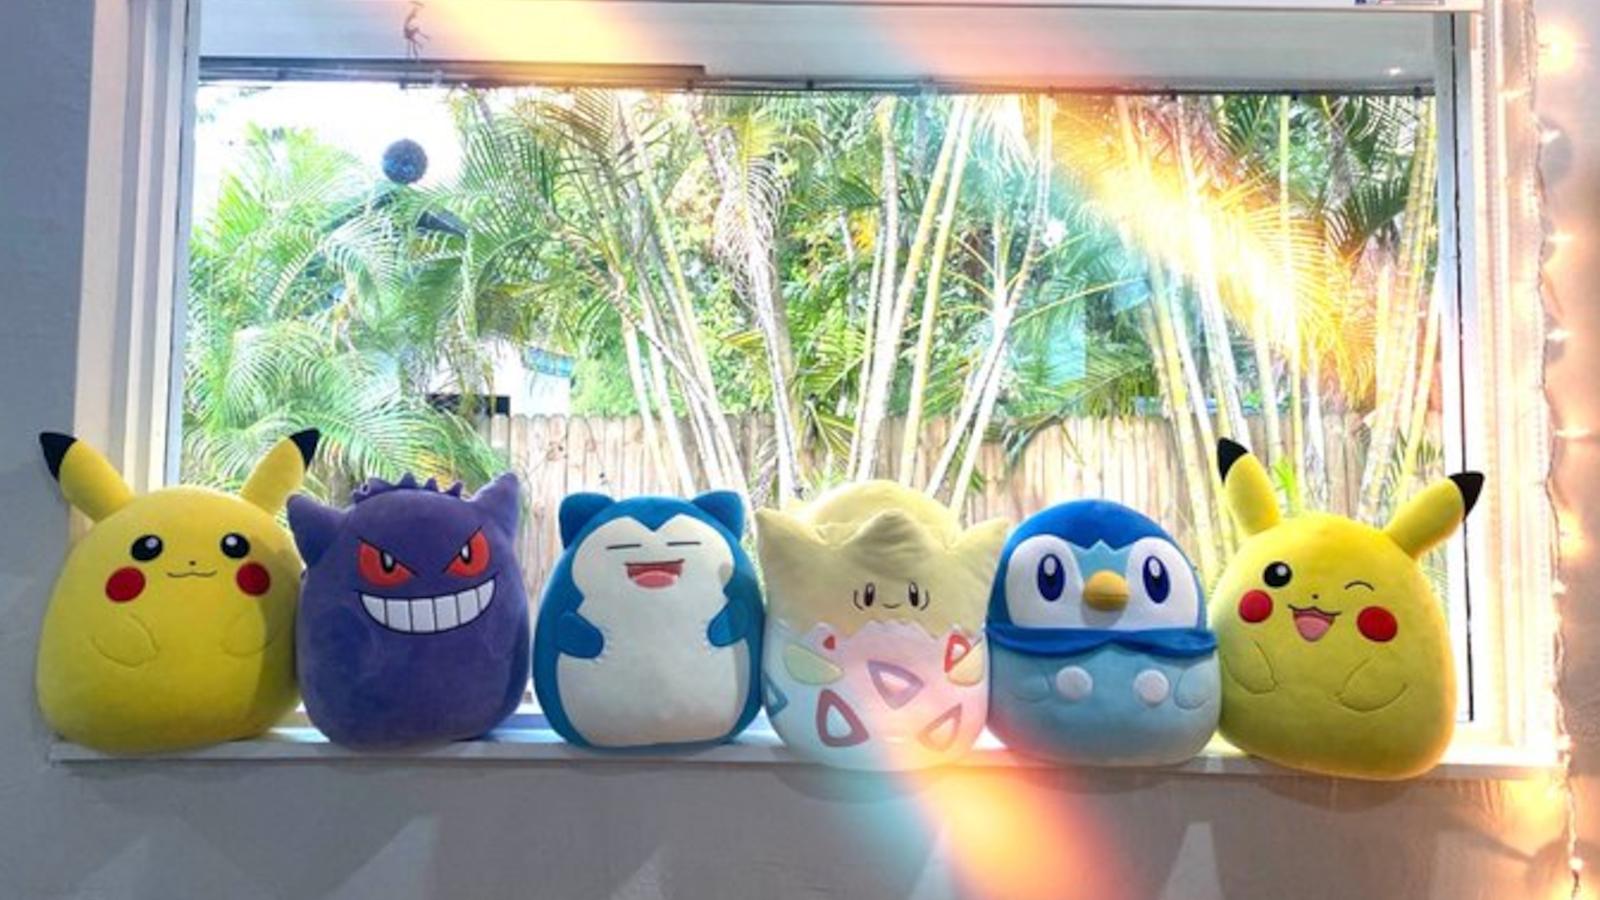 All Squishmallows Pokemon crossover plushies arranged on a window sill.